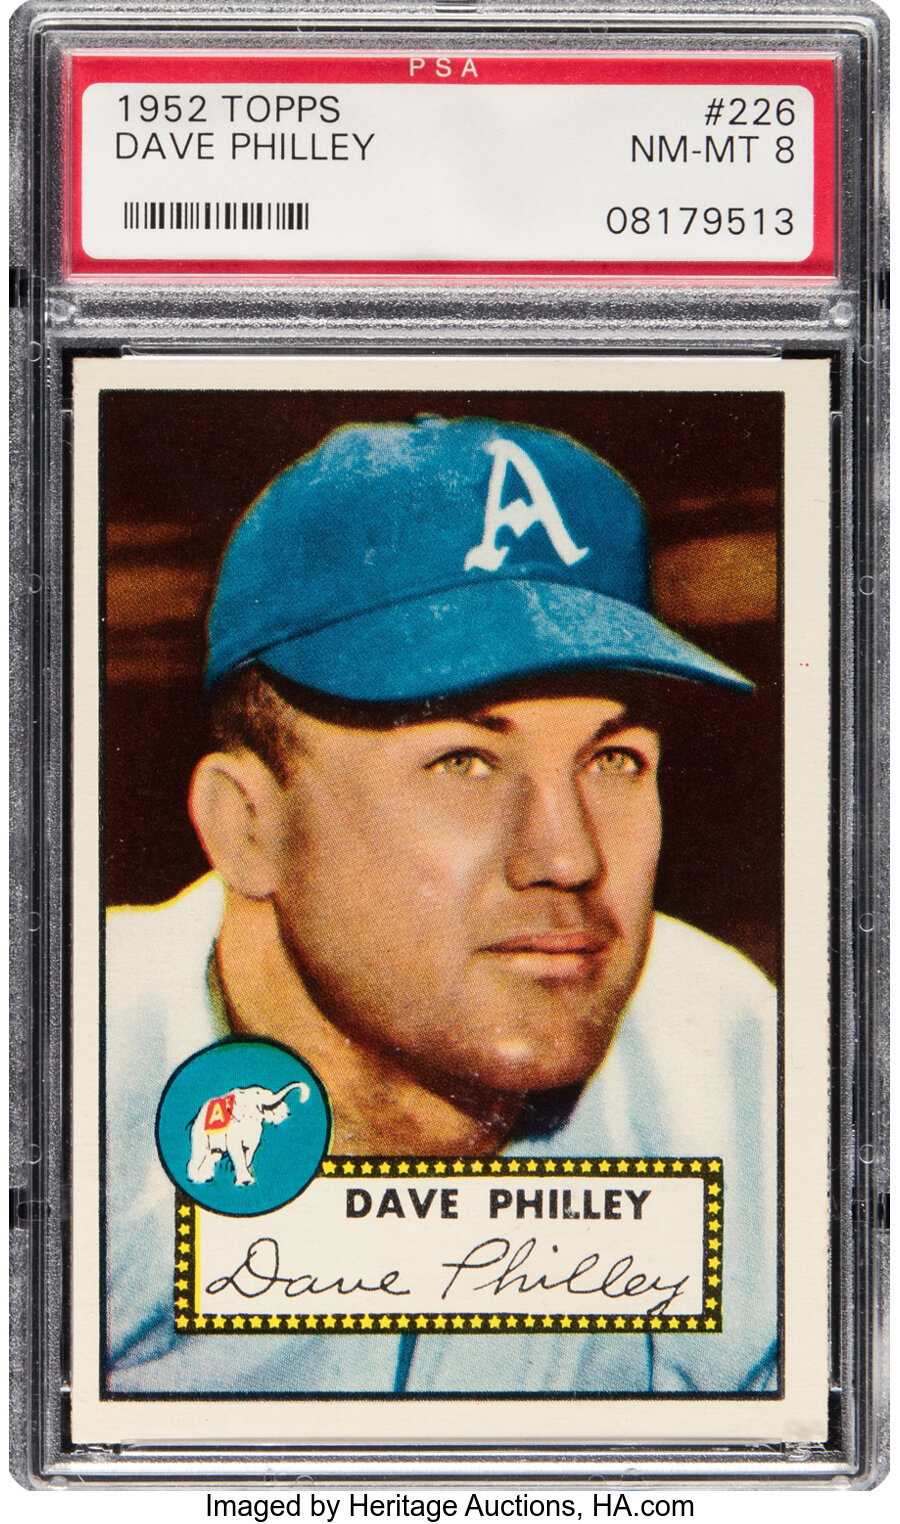 1952 Topps Dave Philley #226 PSA NM-MT 8